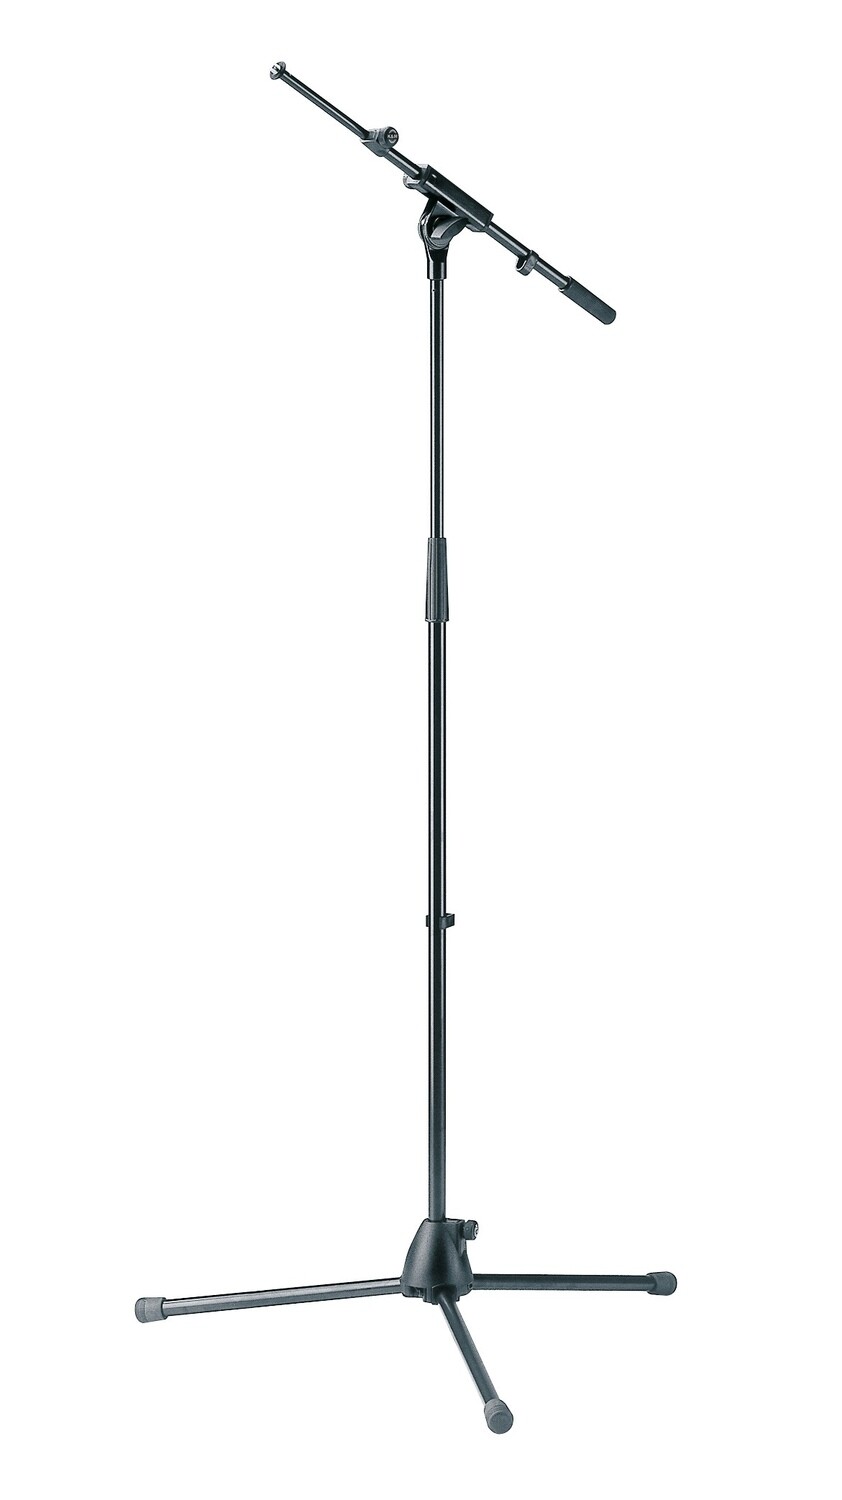 K&M 27195 Microphone Stand - Short Boom, Extendable #KM27195